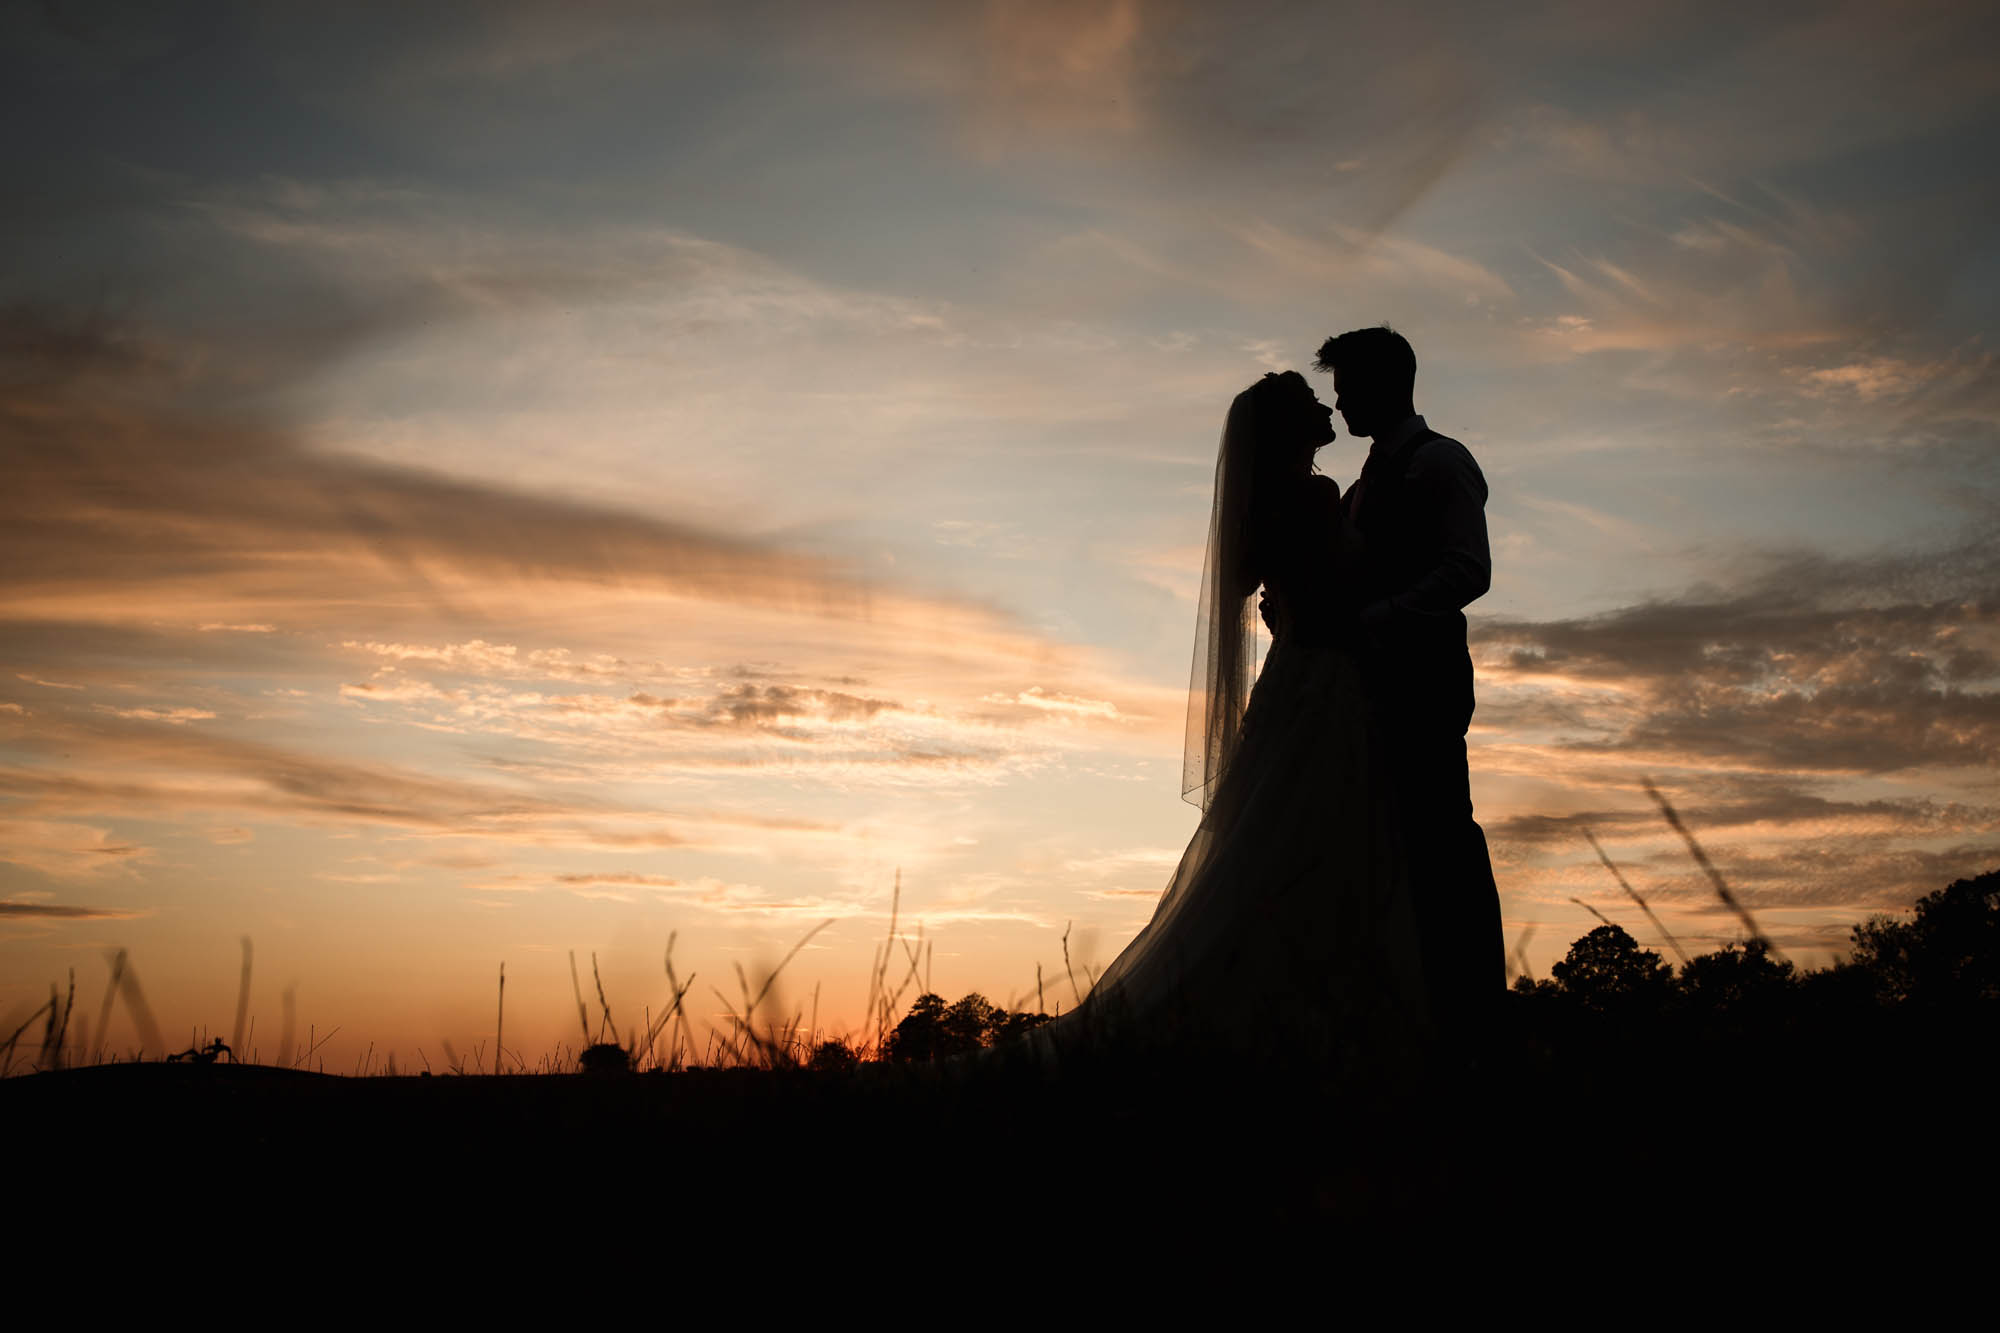 Golden hour wedding photography by Becky Harley in Hertfordshire. Couples bathed in golden light in beautiful surroundings on their wedding days.